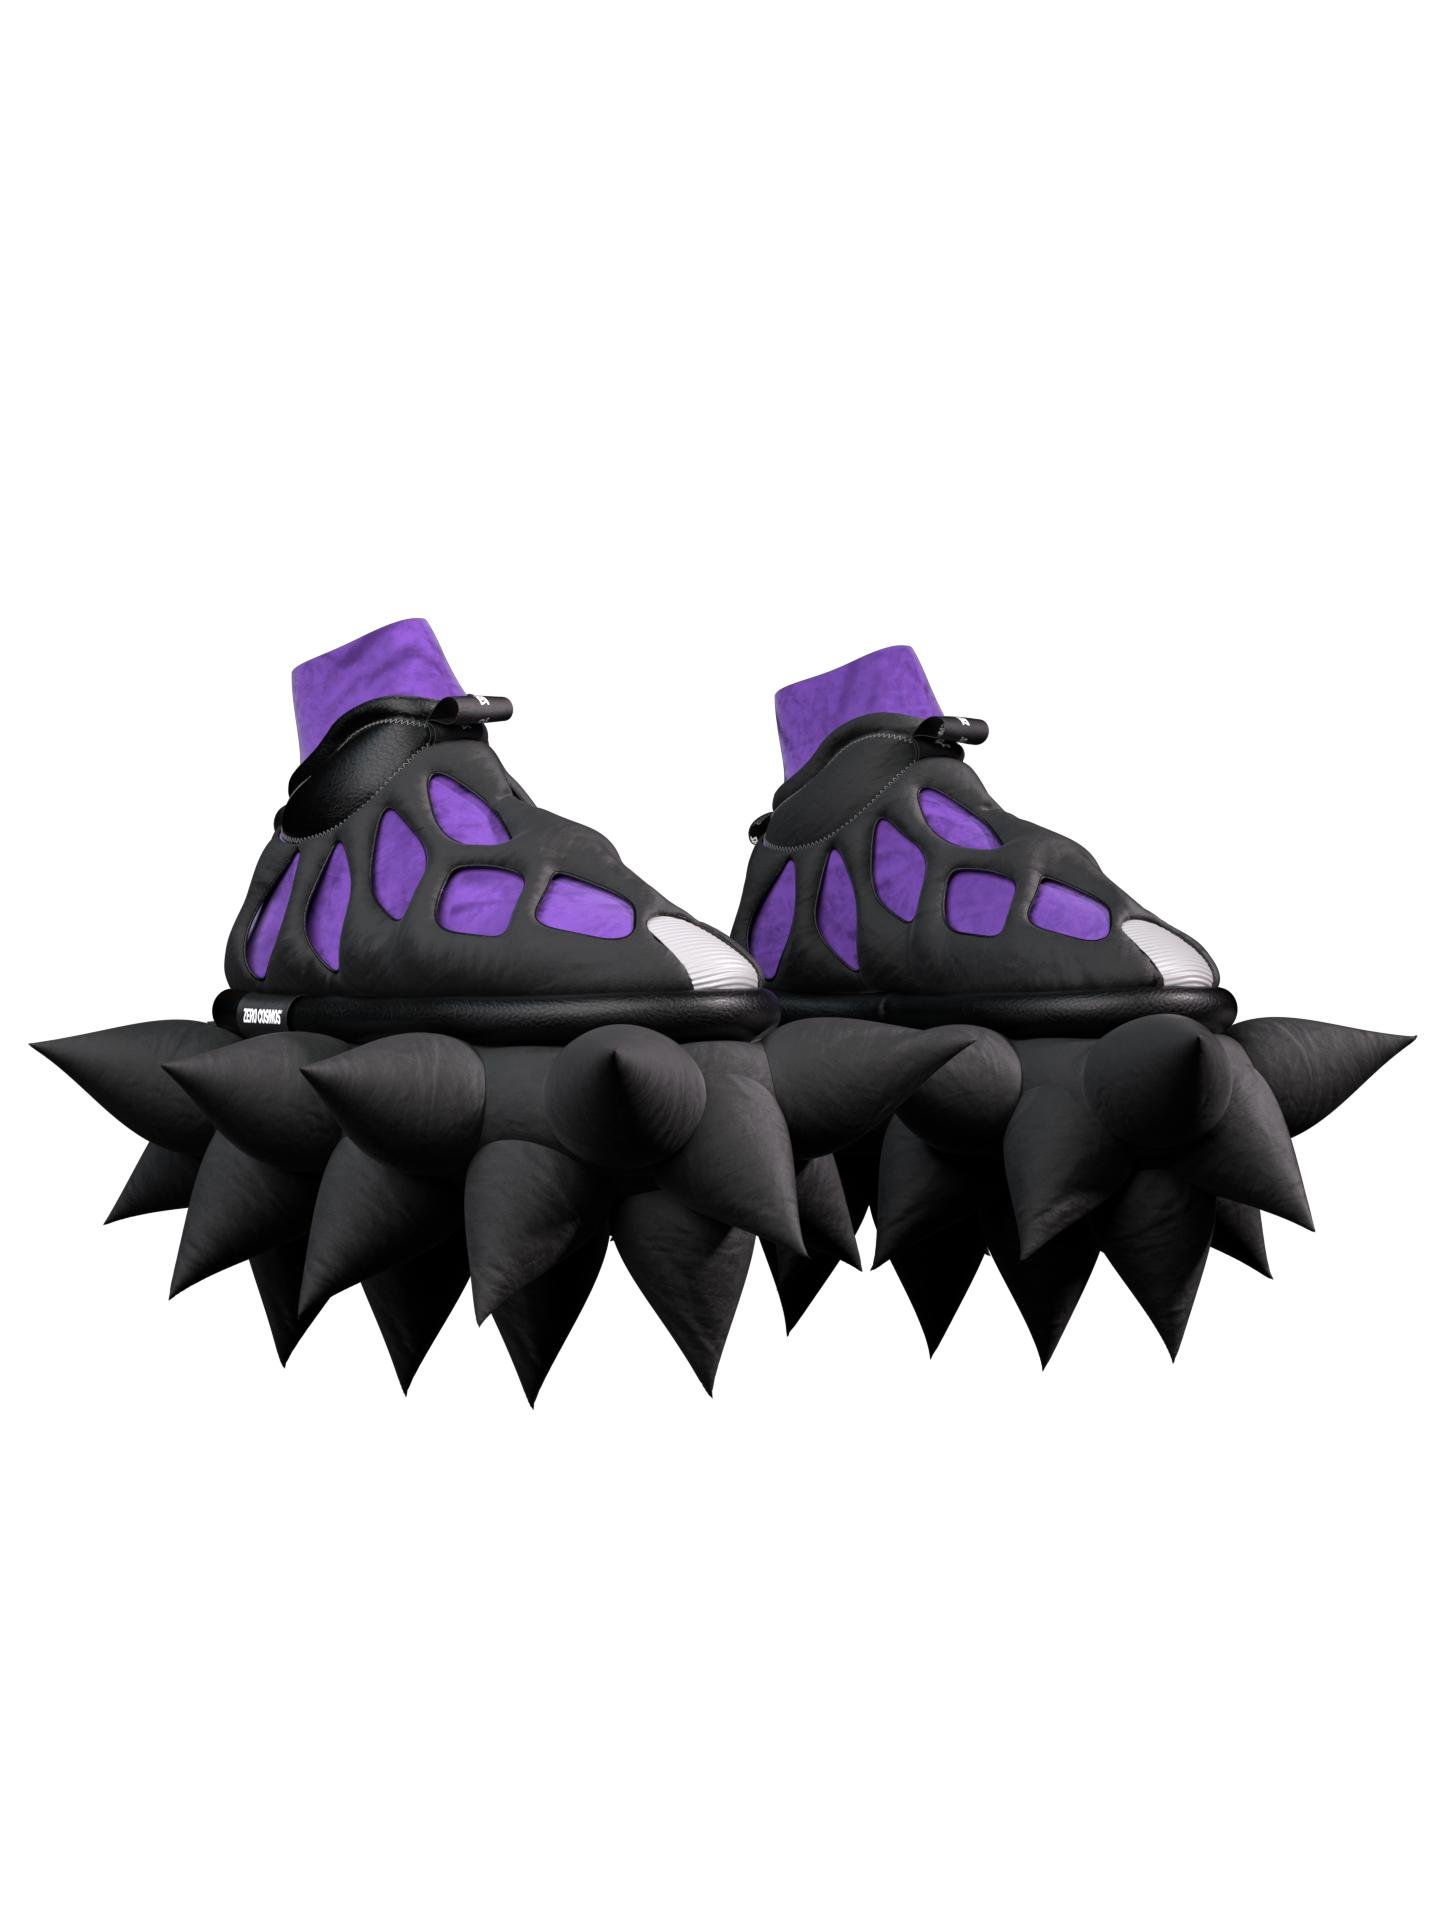 Inflatable Teeth Shoes Purple by ZERO COSMOS